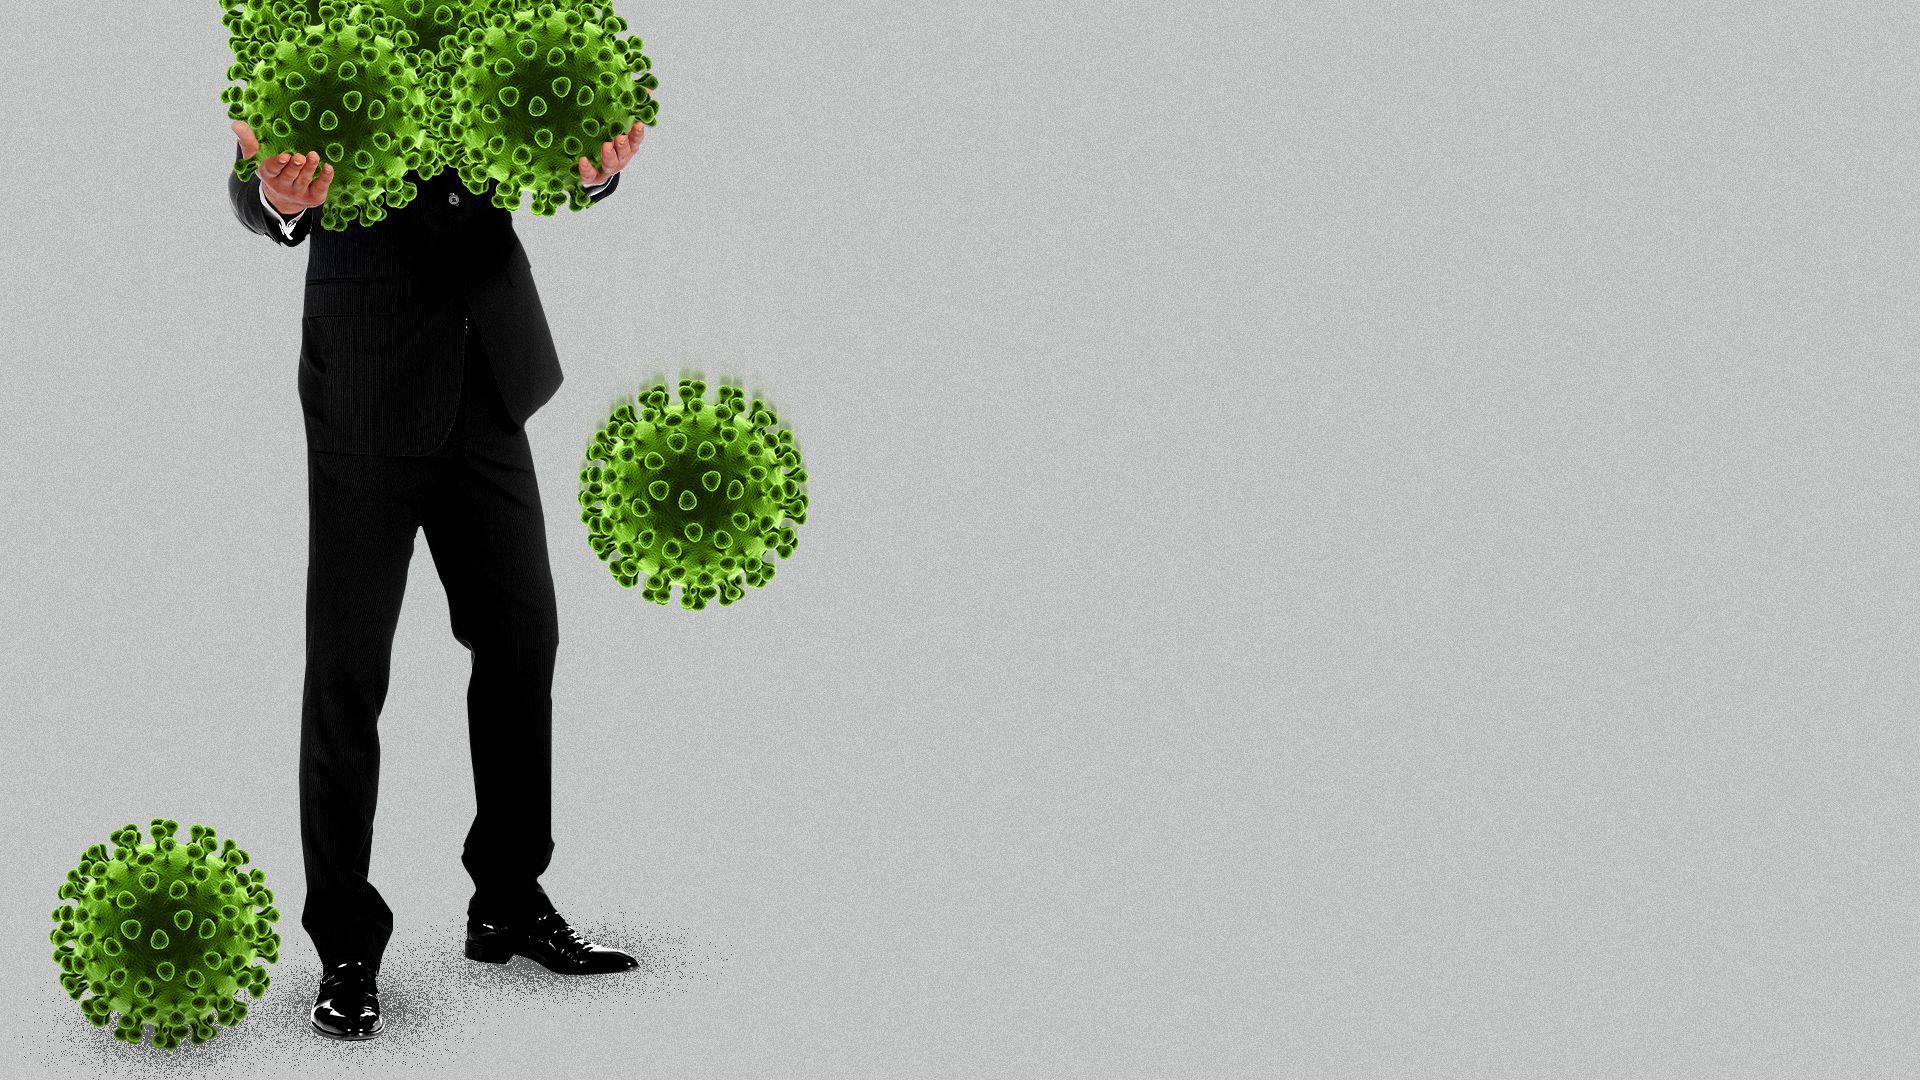 Illustration of a man in a suit struggling to carry several large coronavirus cells, some have fallen. 